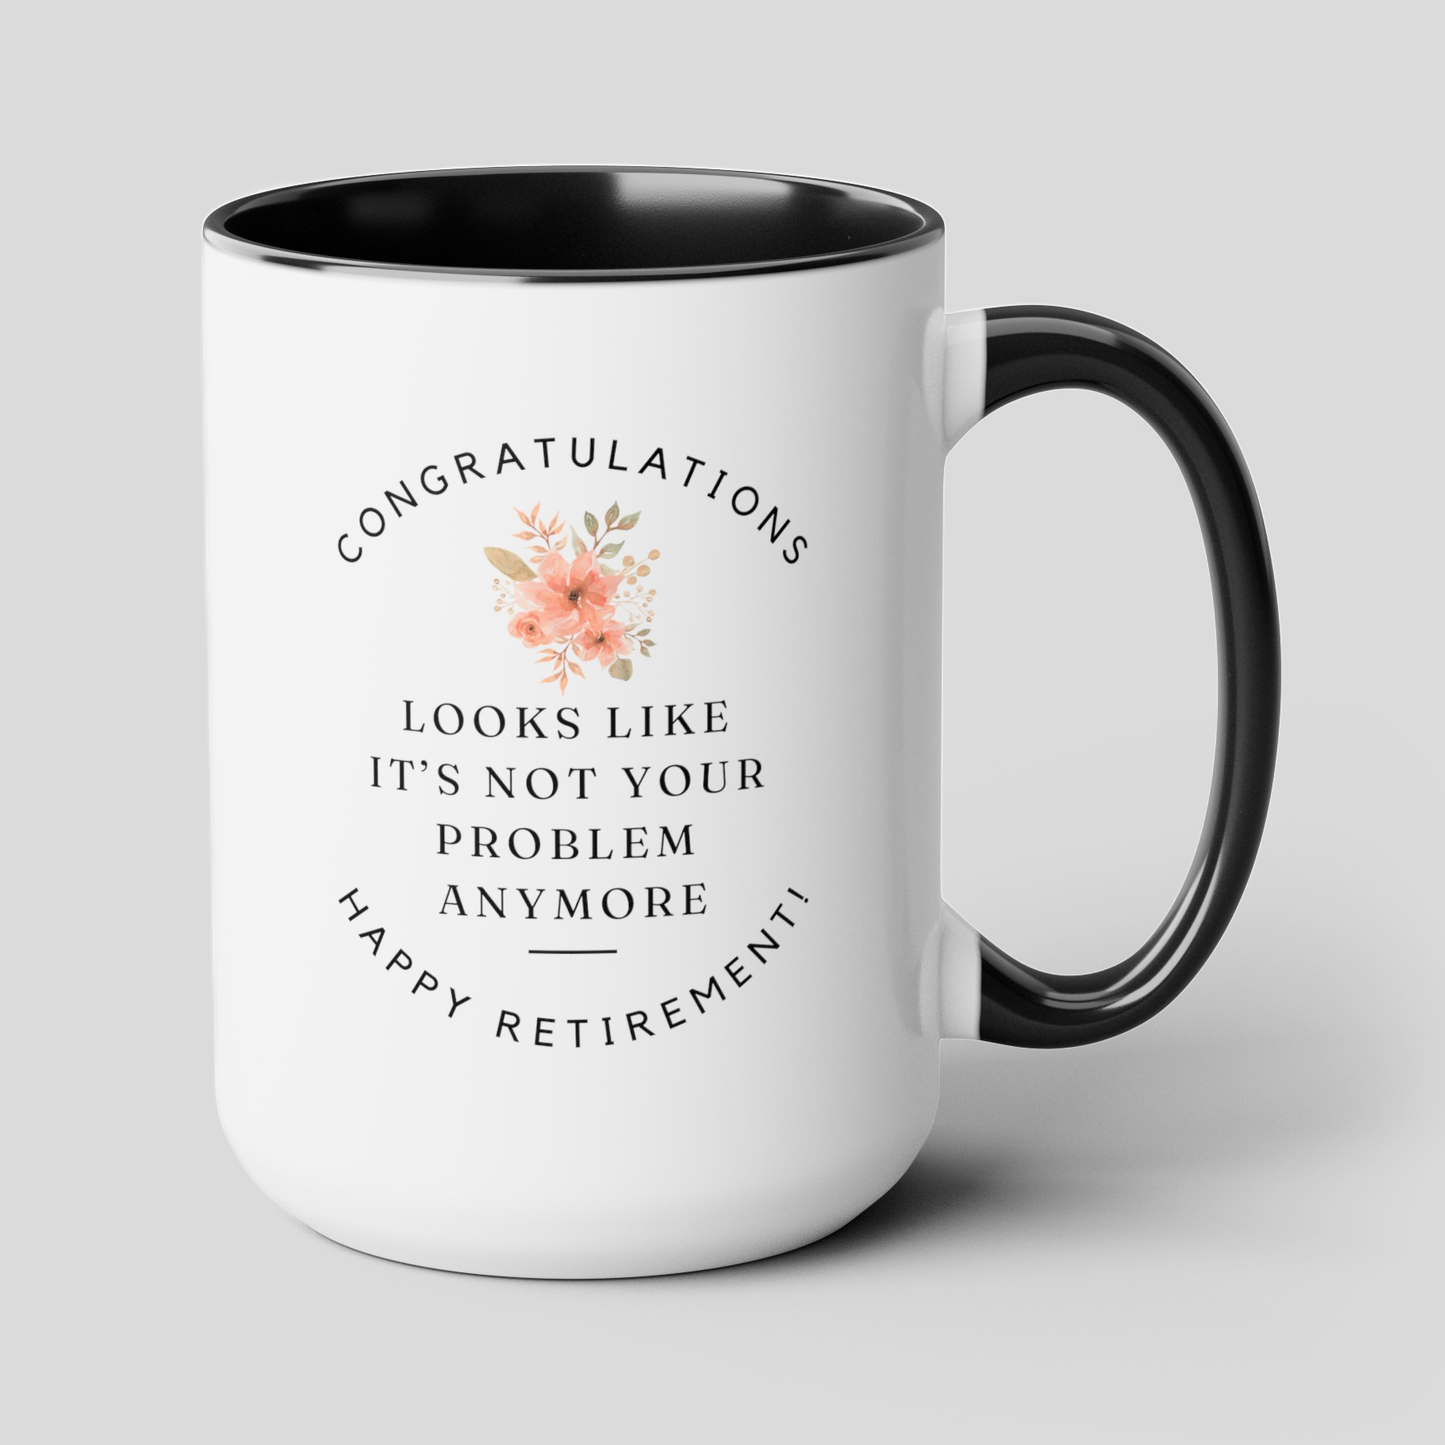 Congratulations Looks Like It's Not Your Problem Anymore Happy Retirement 15oz white with with black accent large big funny coffee mug tea cup gift for retiree her teacher coworker waveywares wavey wares wavywares wavy wares cover